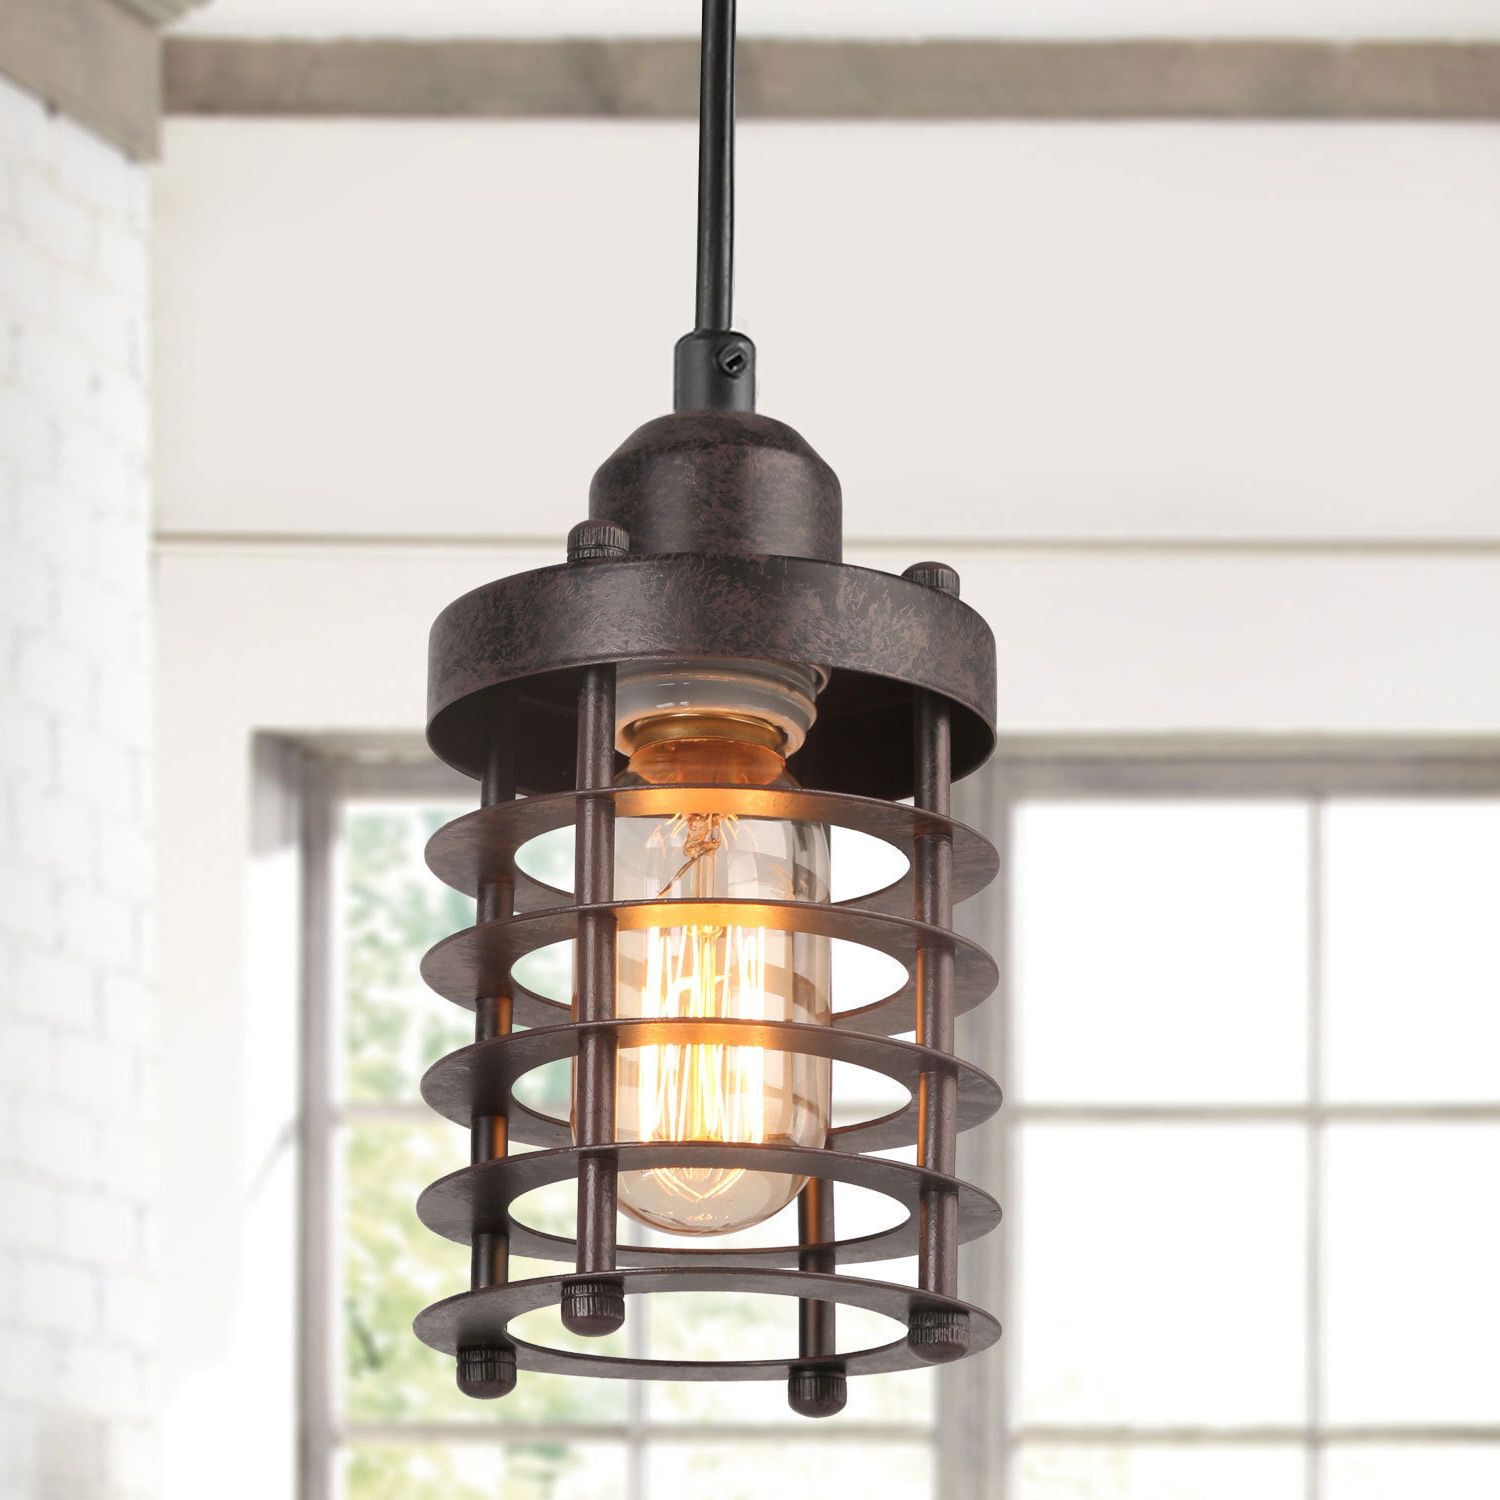 Famous Cream And Rusty Lantern Chandeliers With Regard To Lnc Pendant Lighting For Kitchen Island Farmhouse Barn Mini Cage Hanging  Lamp In Rust Finish – Walmart (View 12 of 15)